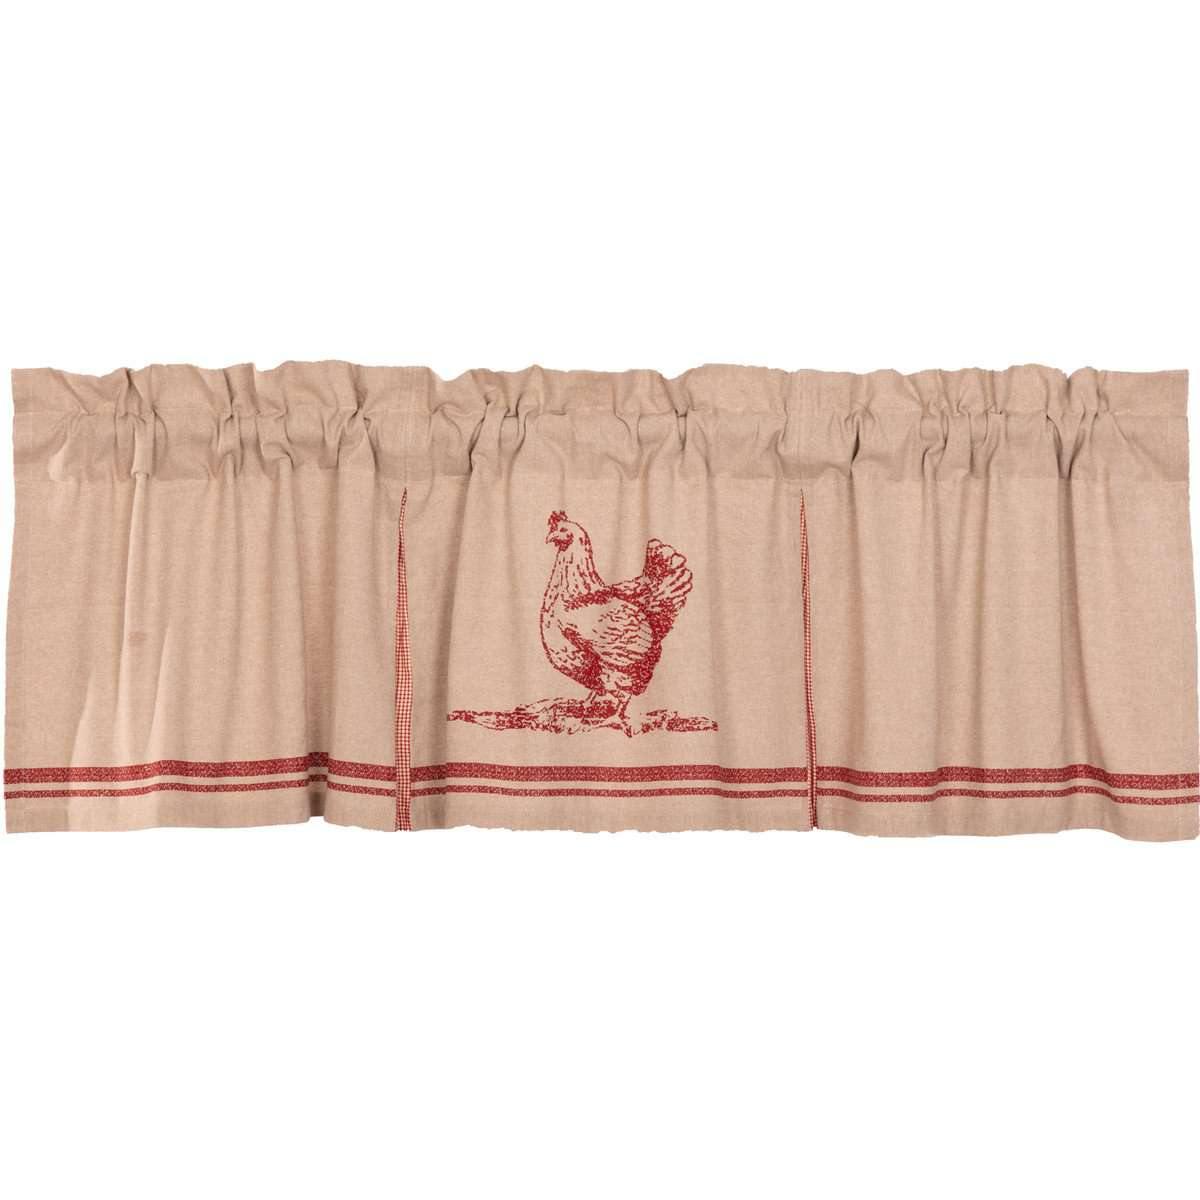 Sawyer Mill Red Chicken Valance Pleated Curtain 20x72 VHC Brands - The Fox Decor